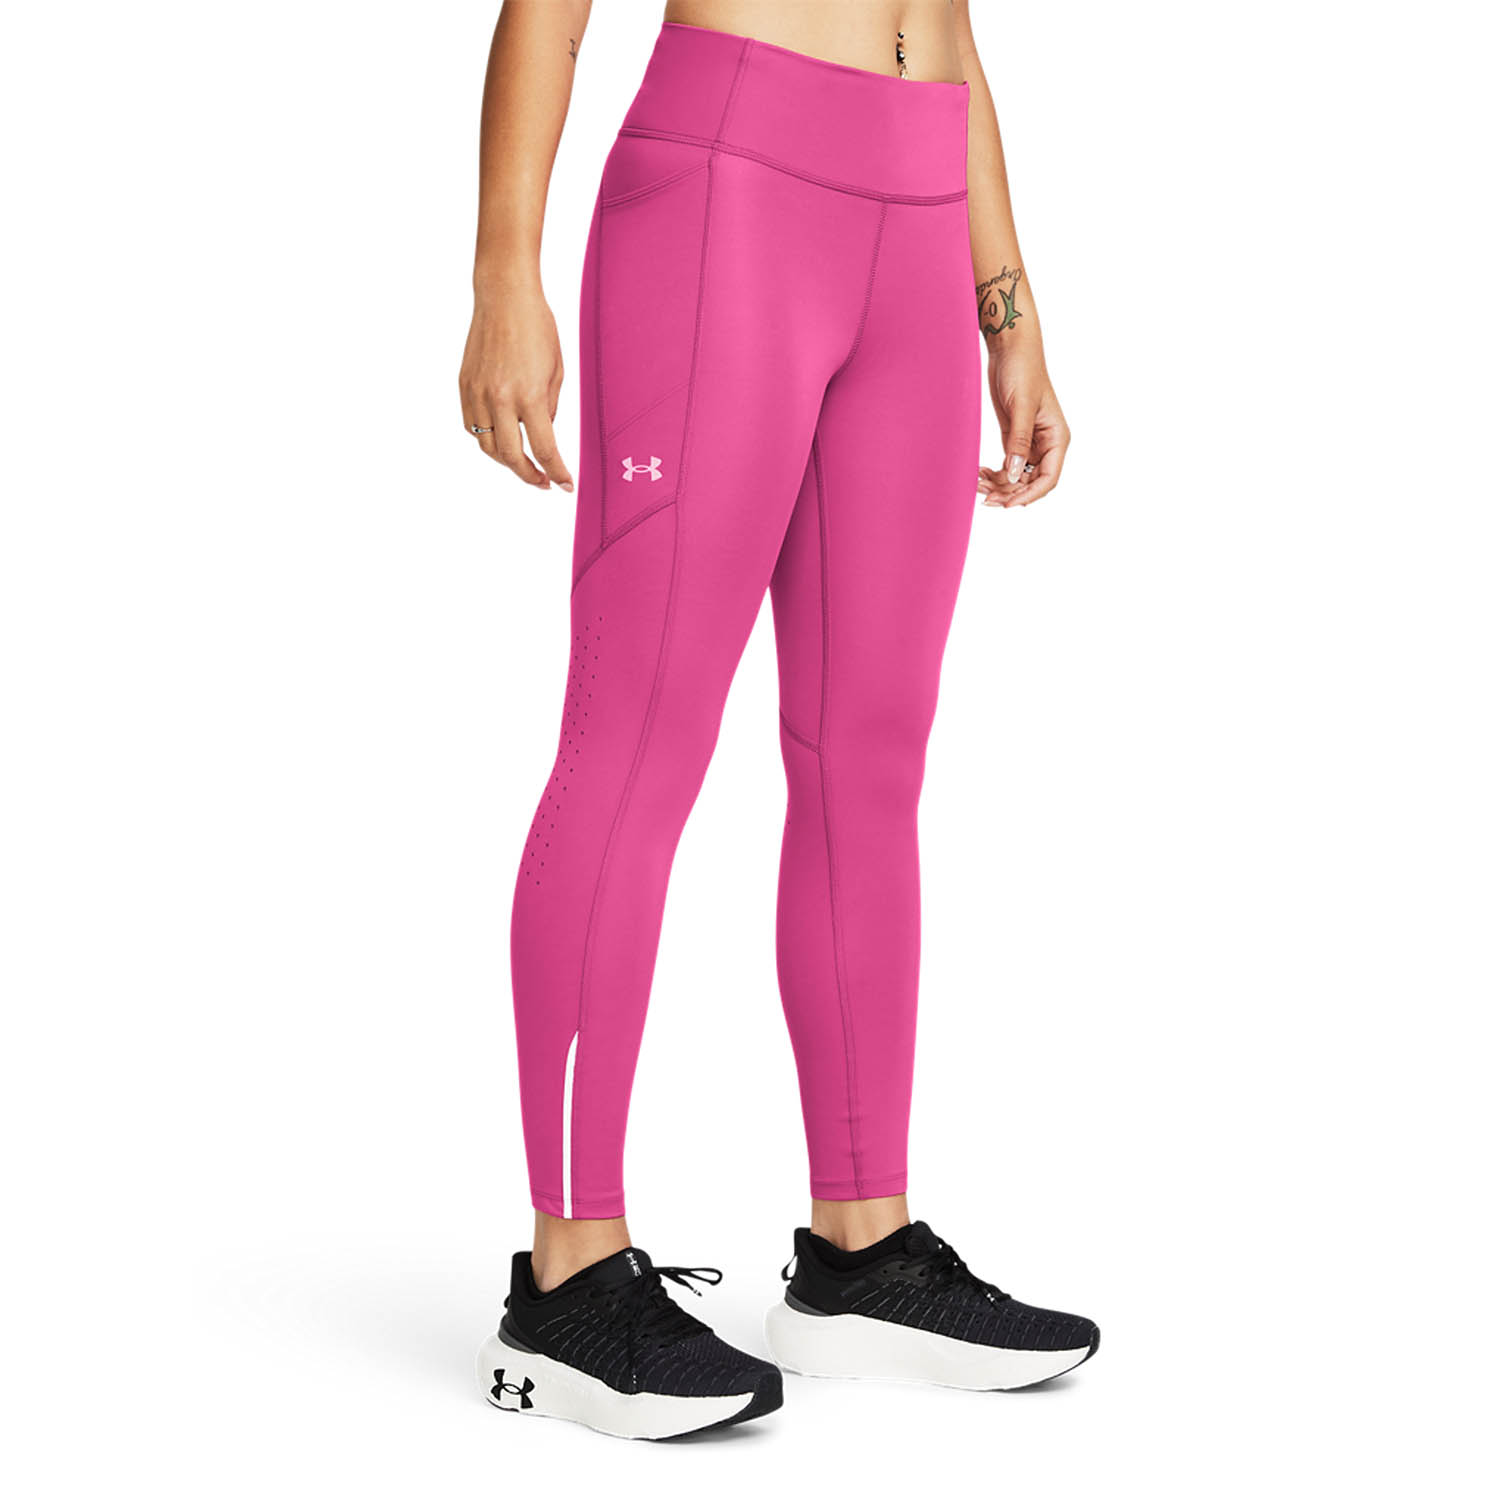 Under Armour Fly Fast 3.0 Women's Running Tights - Astro Pink